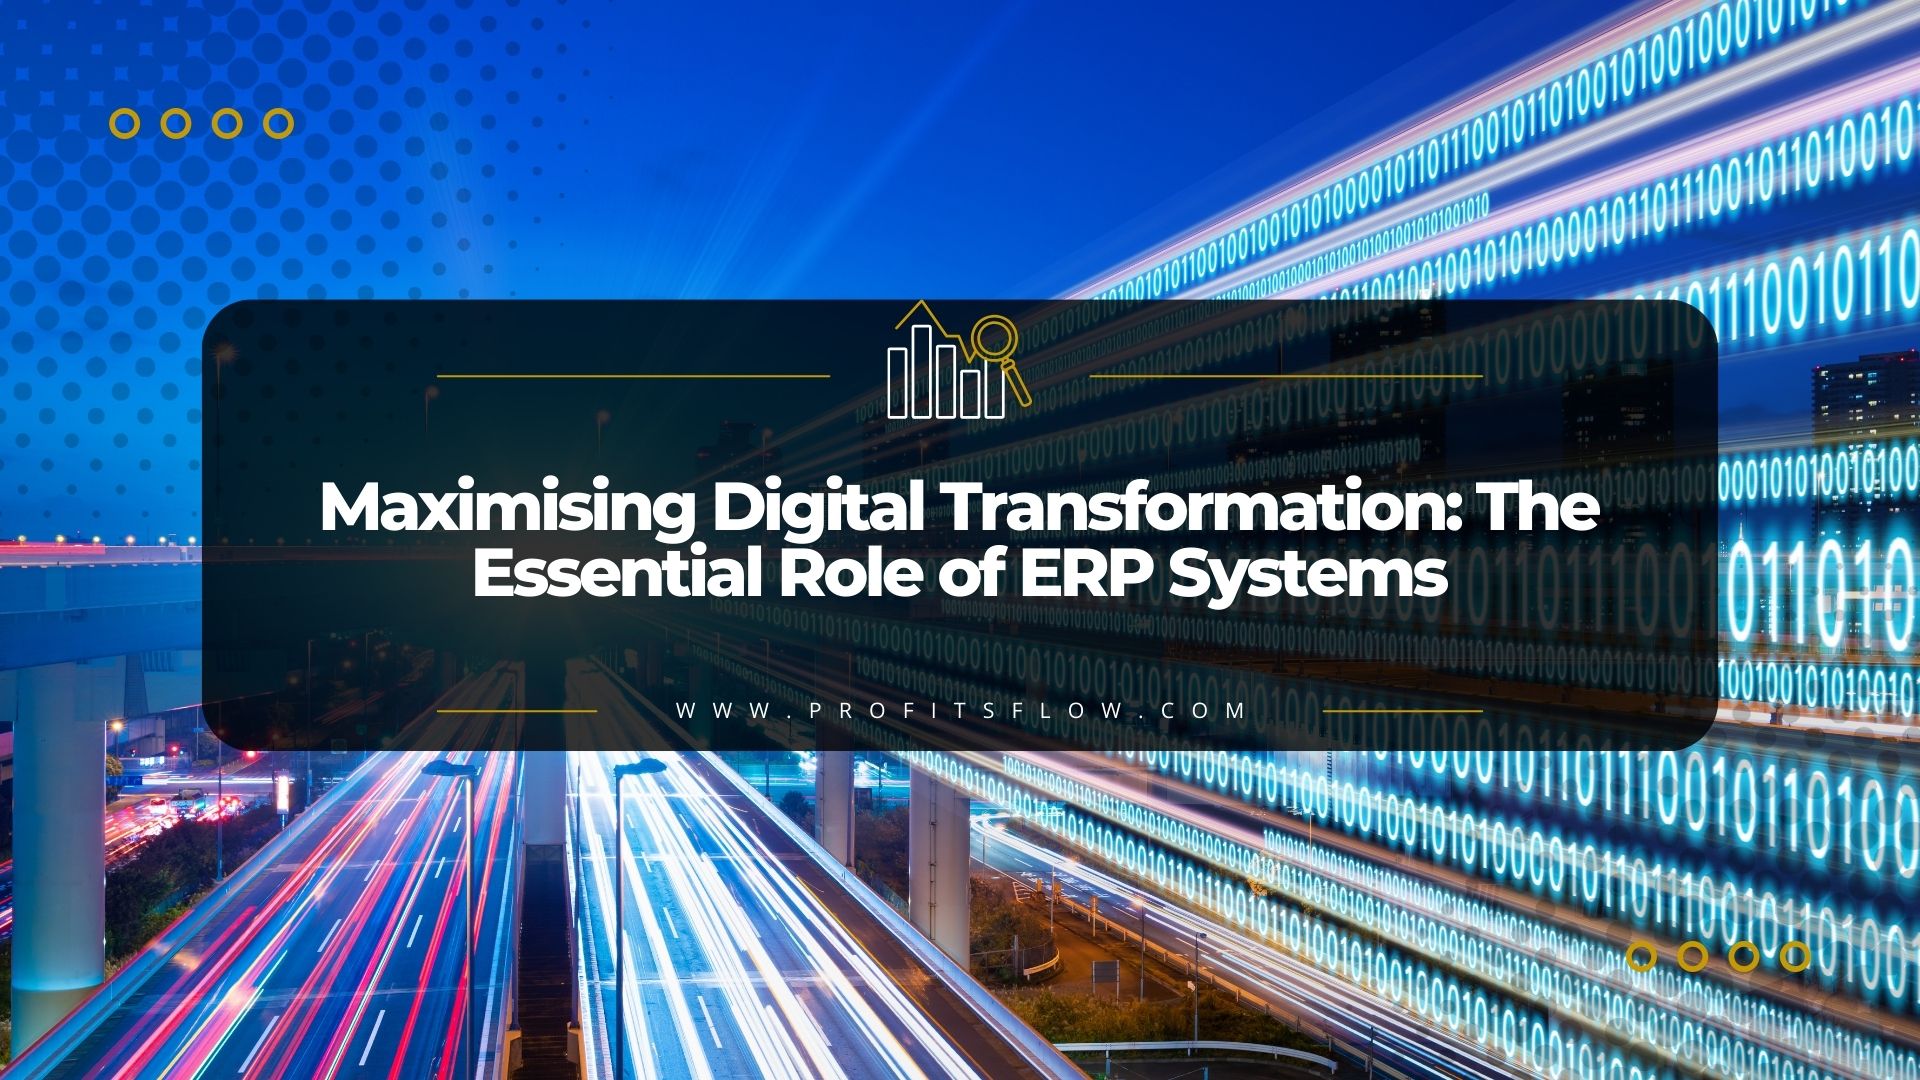 Maximising Digital Transformation: The Essential Role of ERP Systems